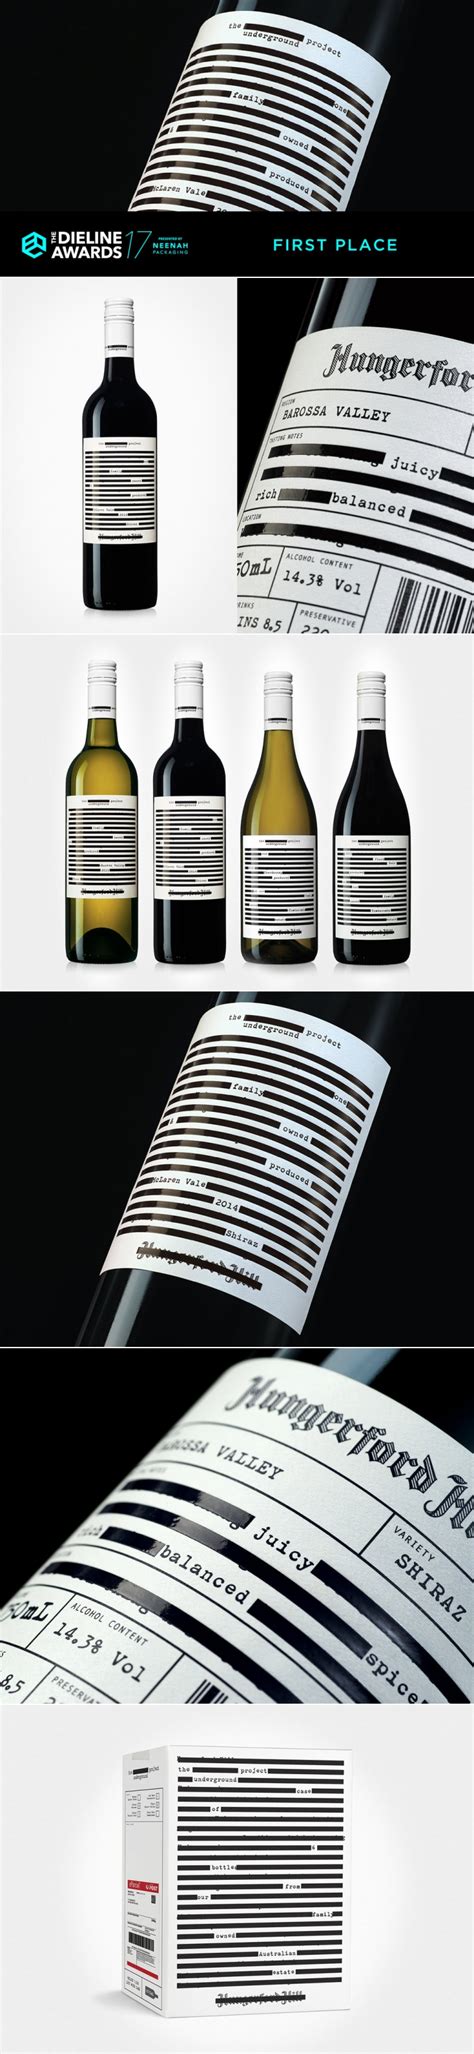 The Dieline Awards 2017 The Underground Project Wines Graphic Design